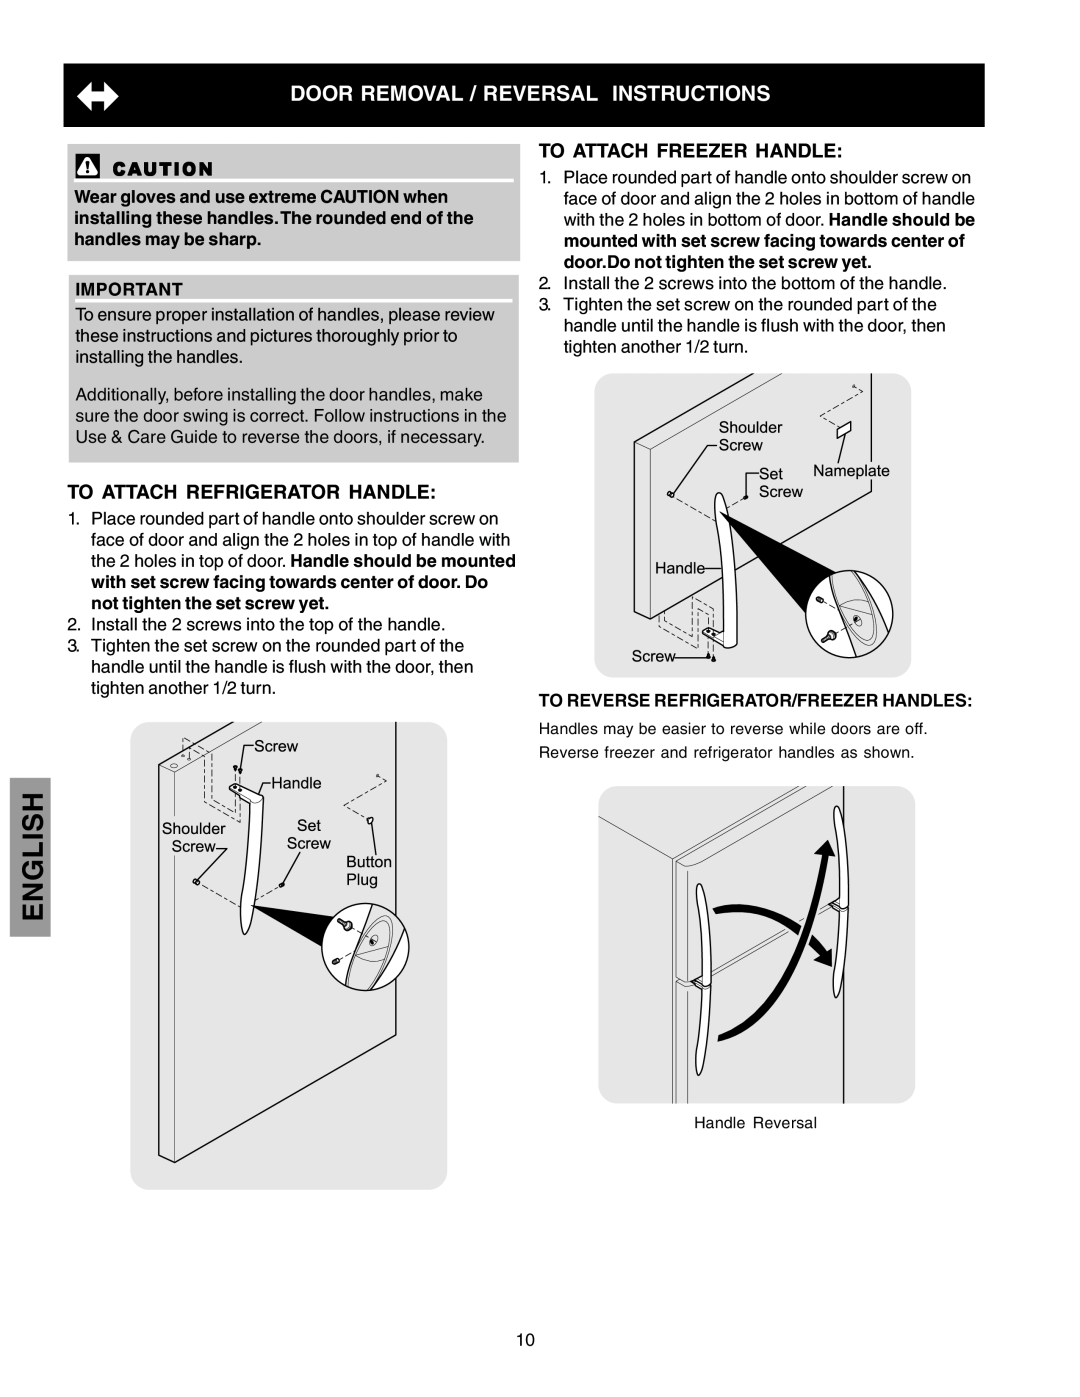 Kenmore 241815202 English, Door Removal / Reversal Instructions, To Attach Refrigerator Handle, To Attach Freezer Handle 